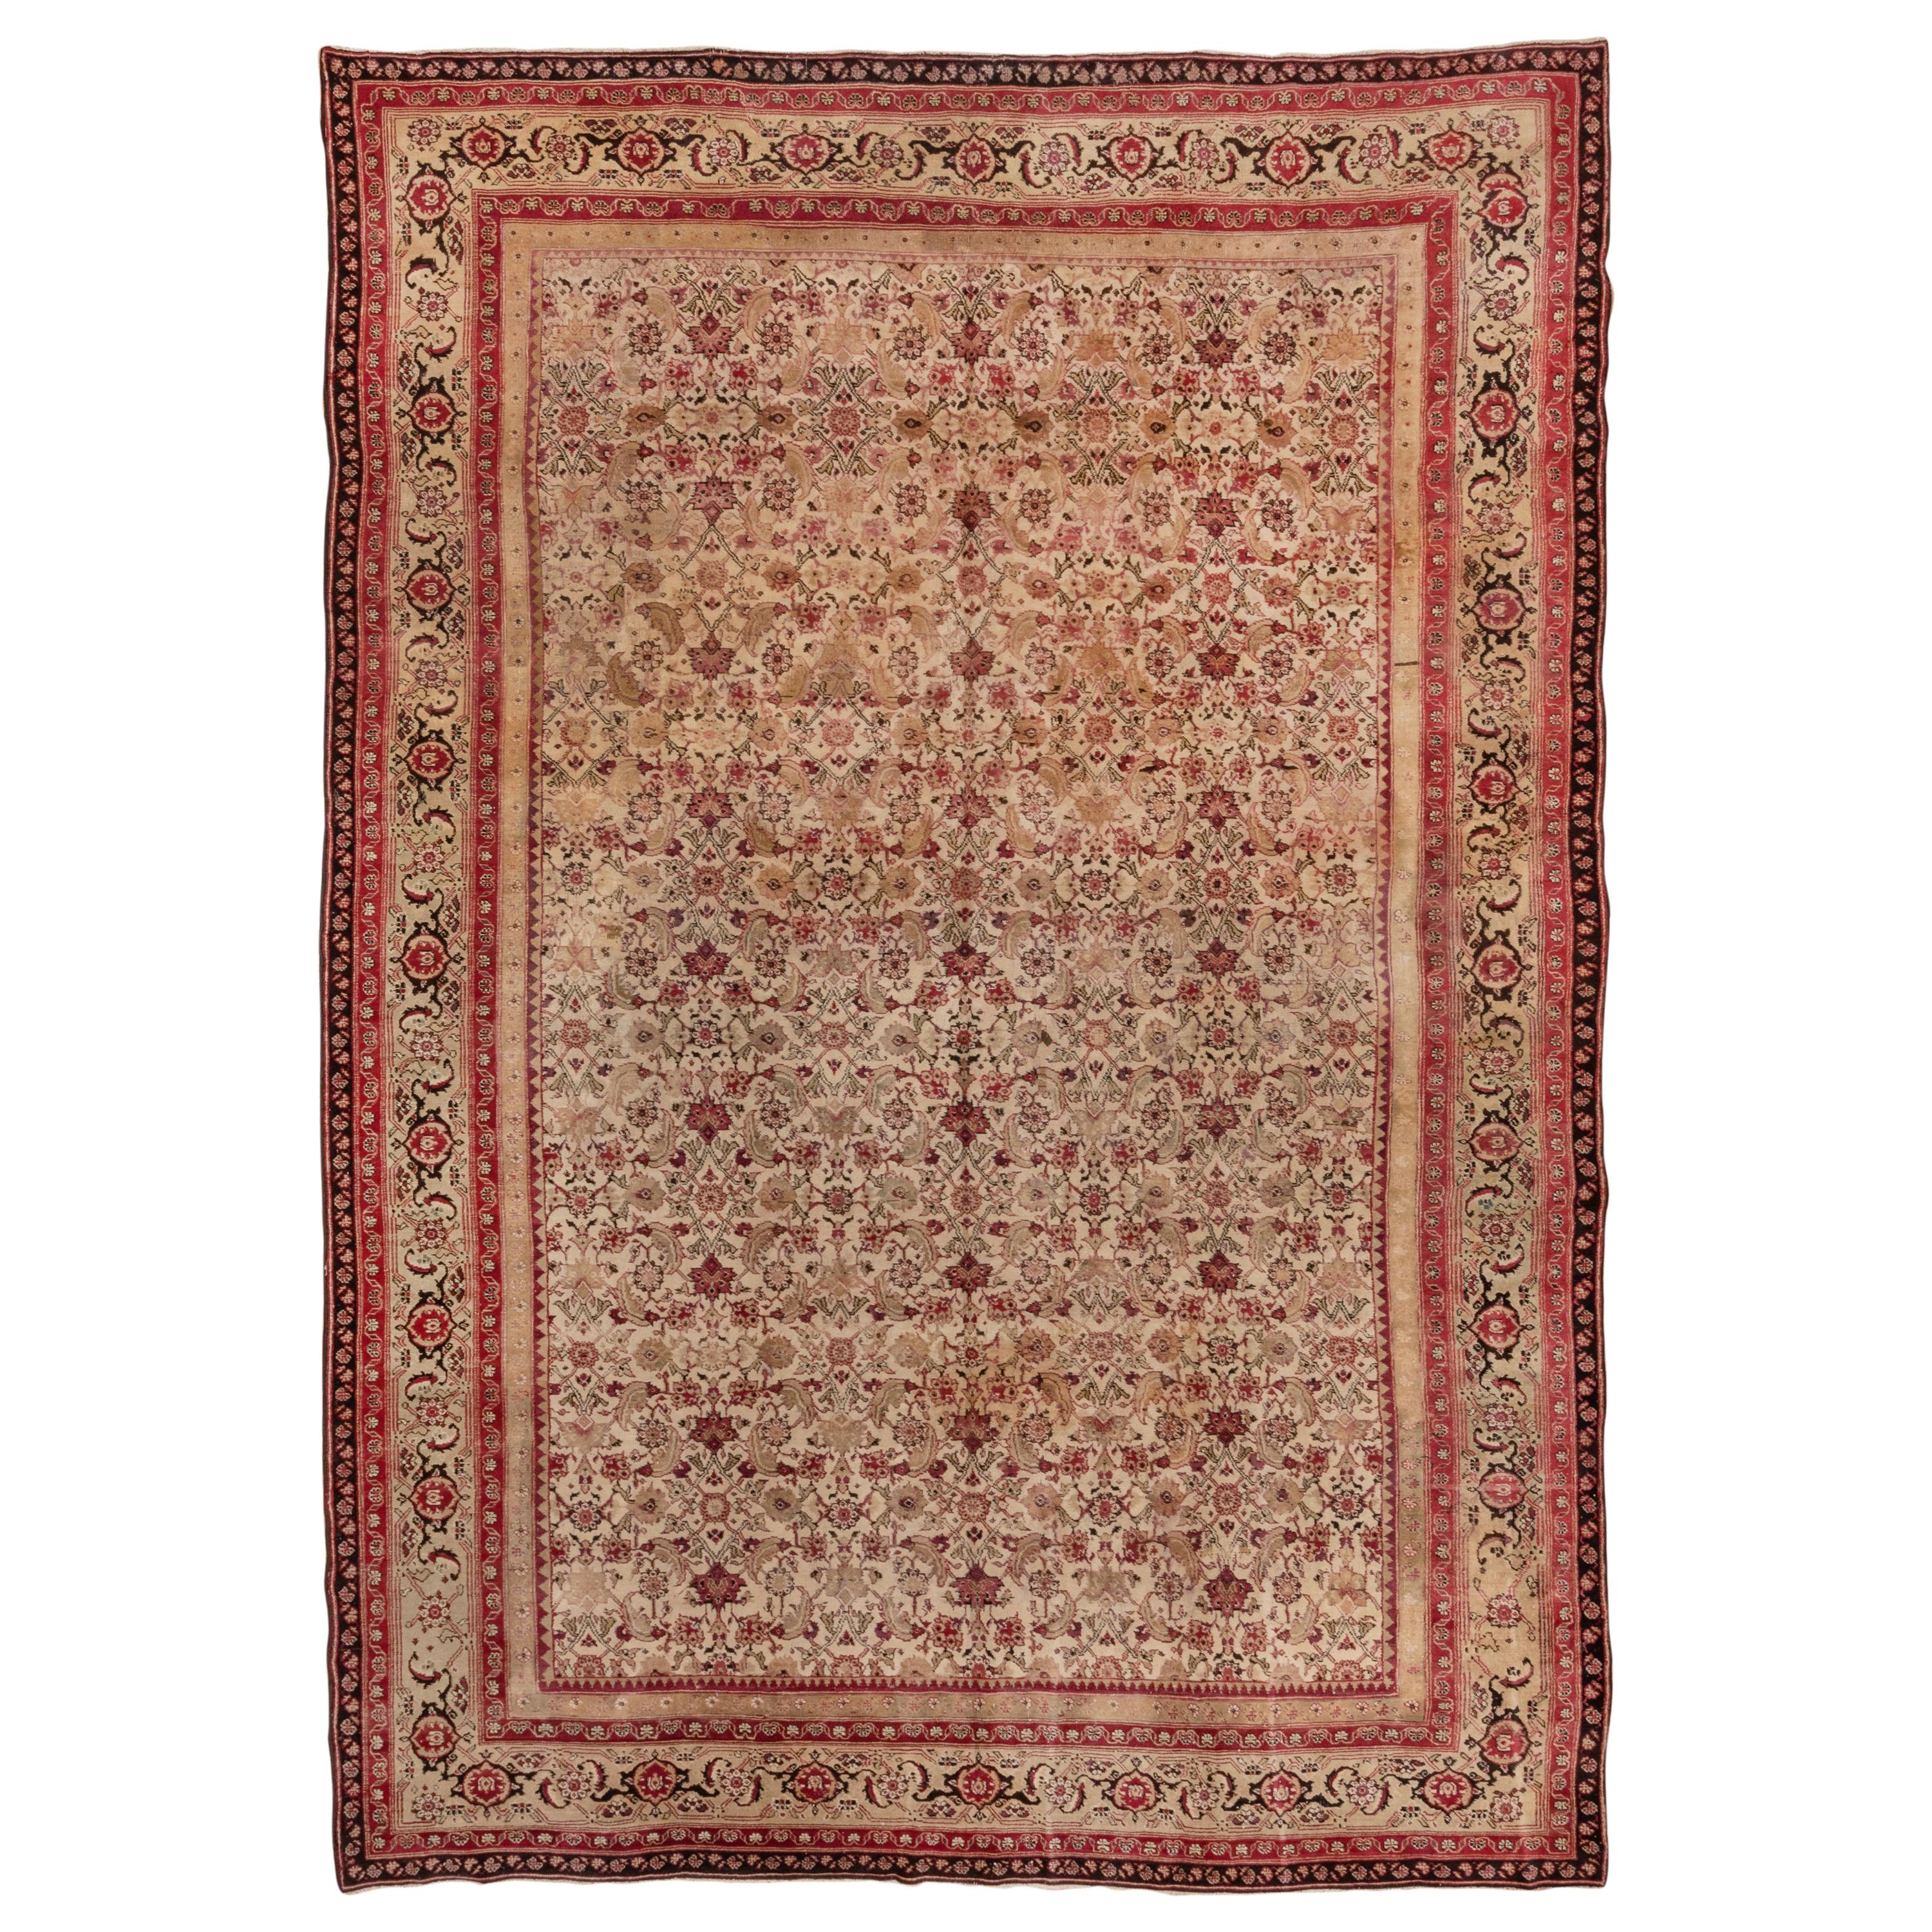 Antique Red Indian Agra Carpet, All-Over Field, Ivory Field